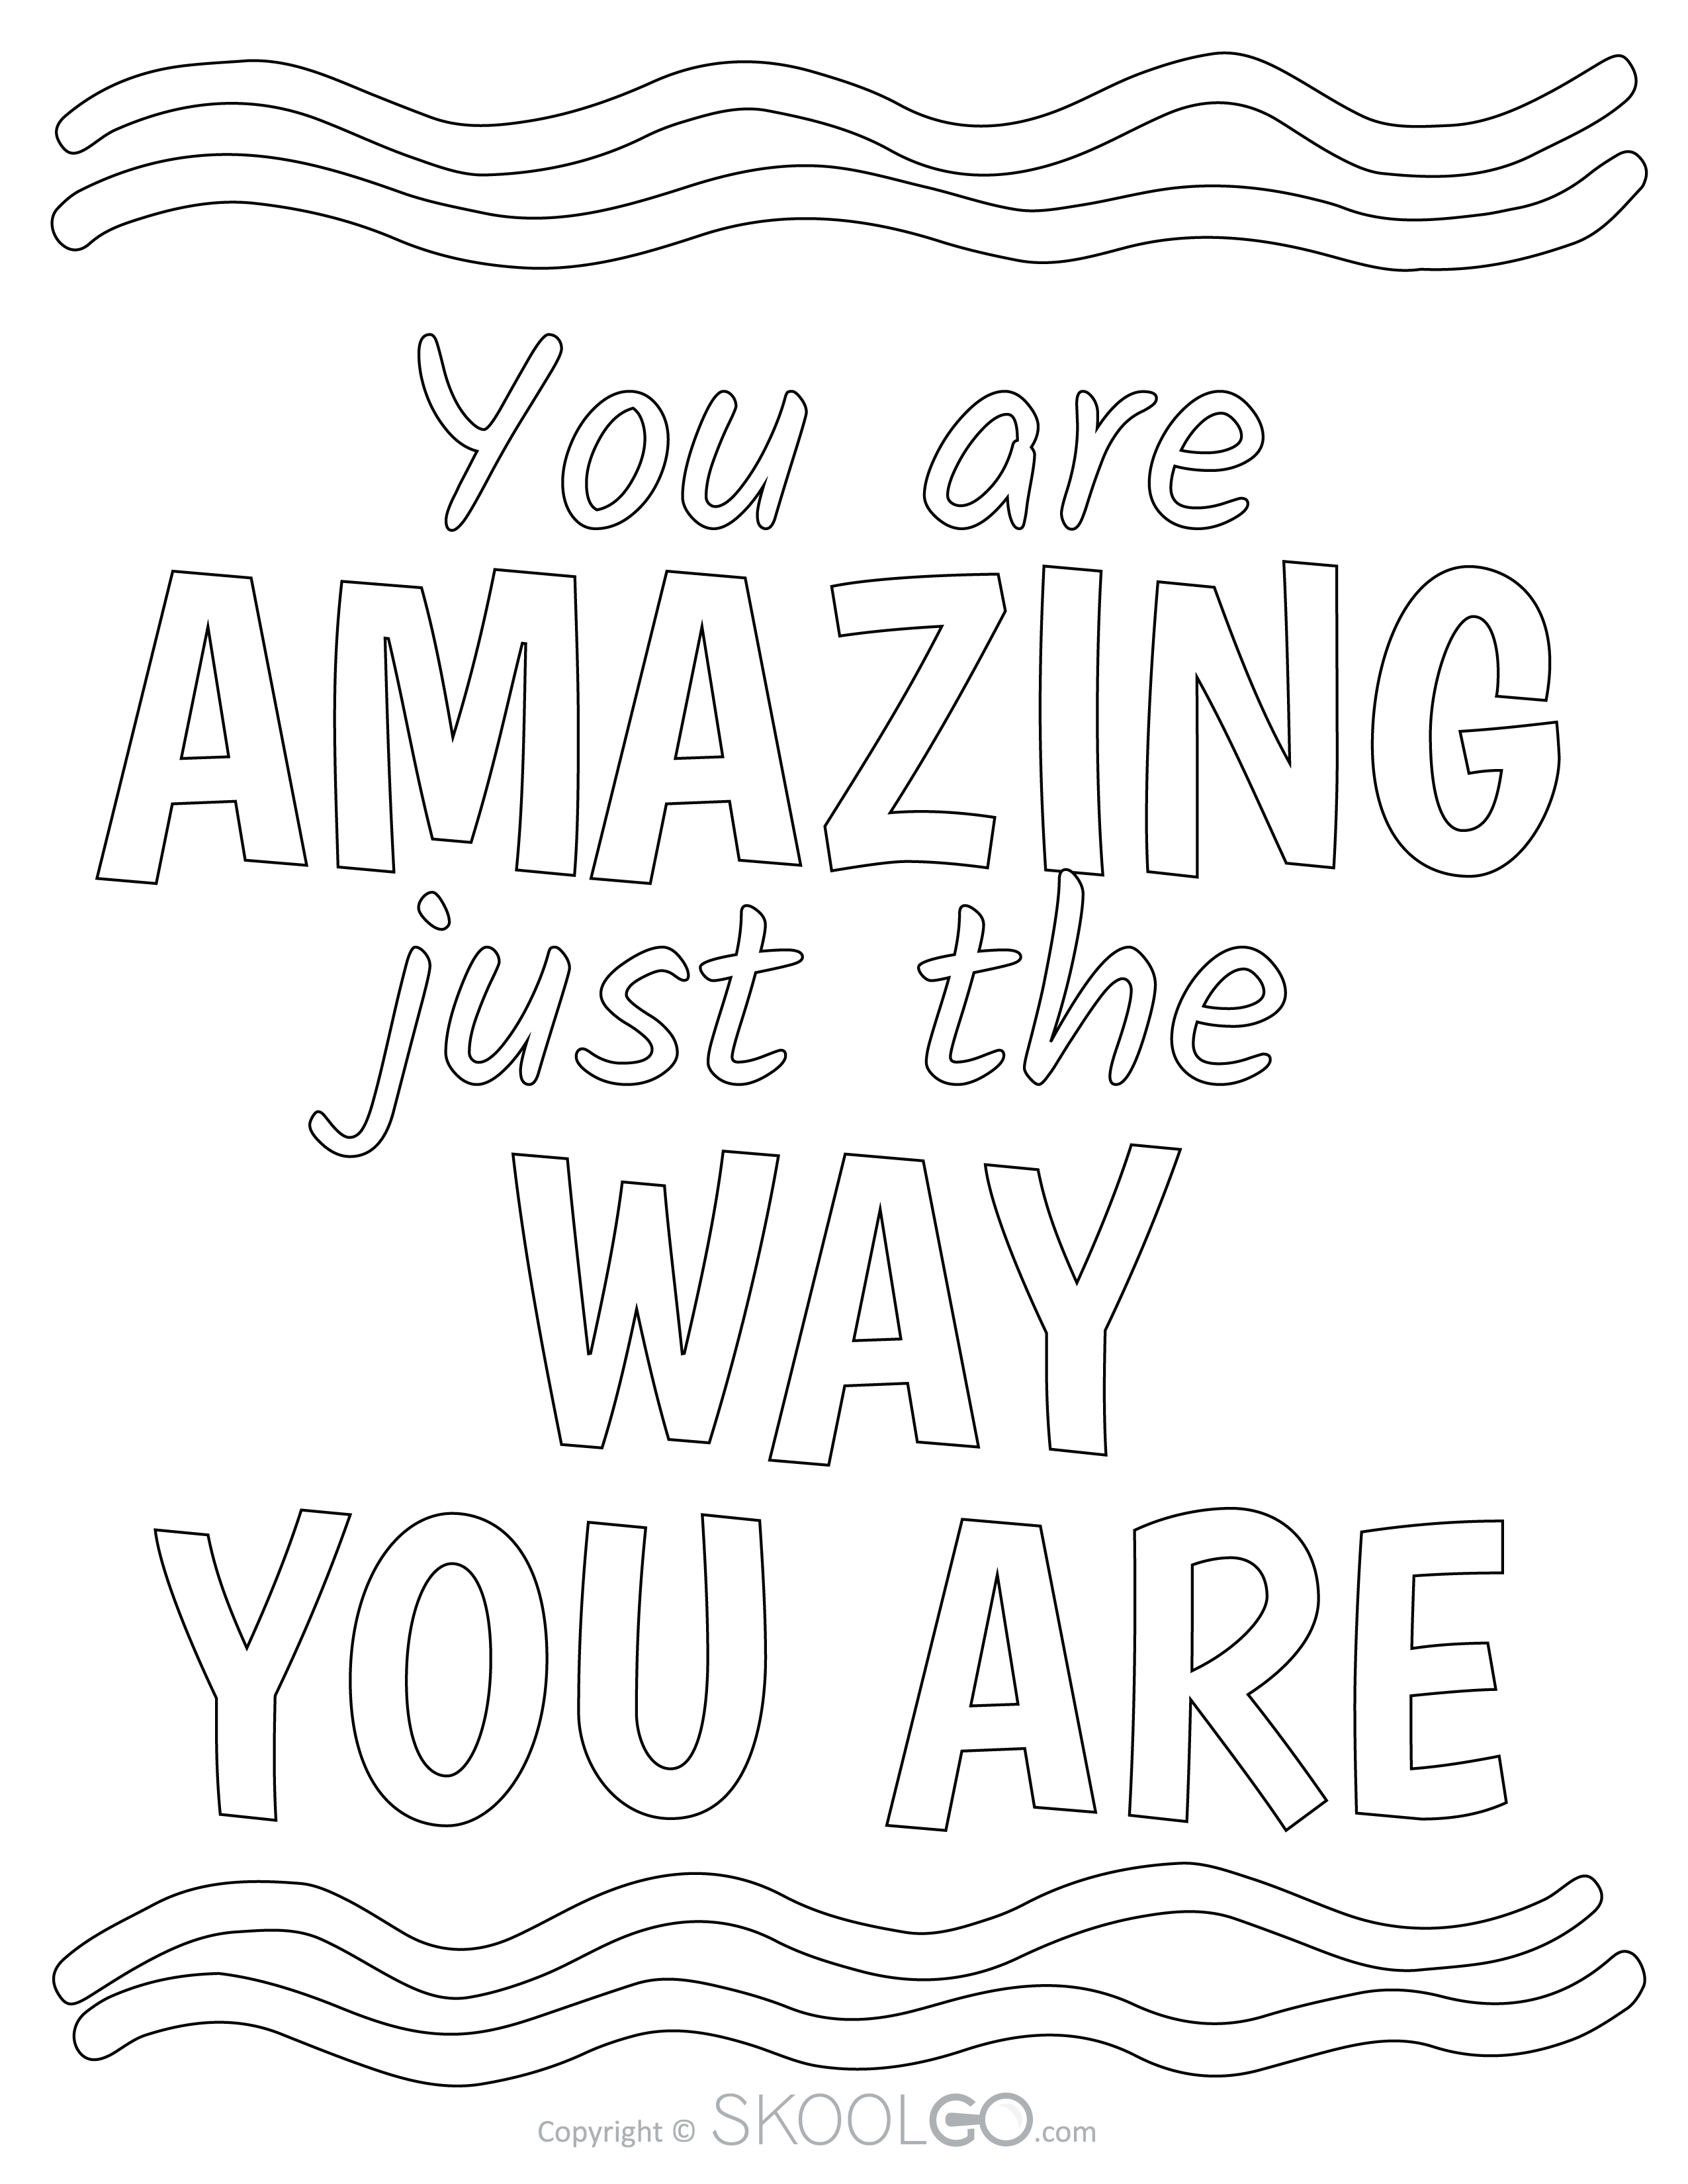 You Are Amazing Just The Way You Are - Free Coloring Version Poster